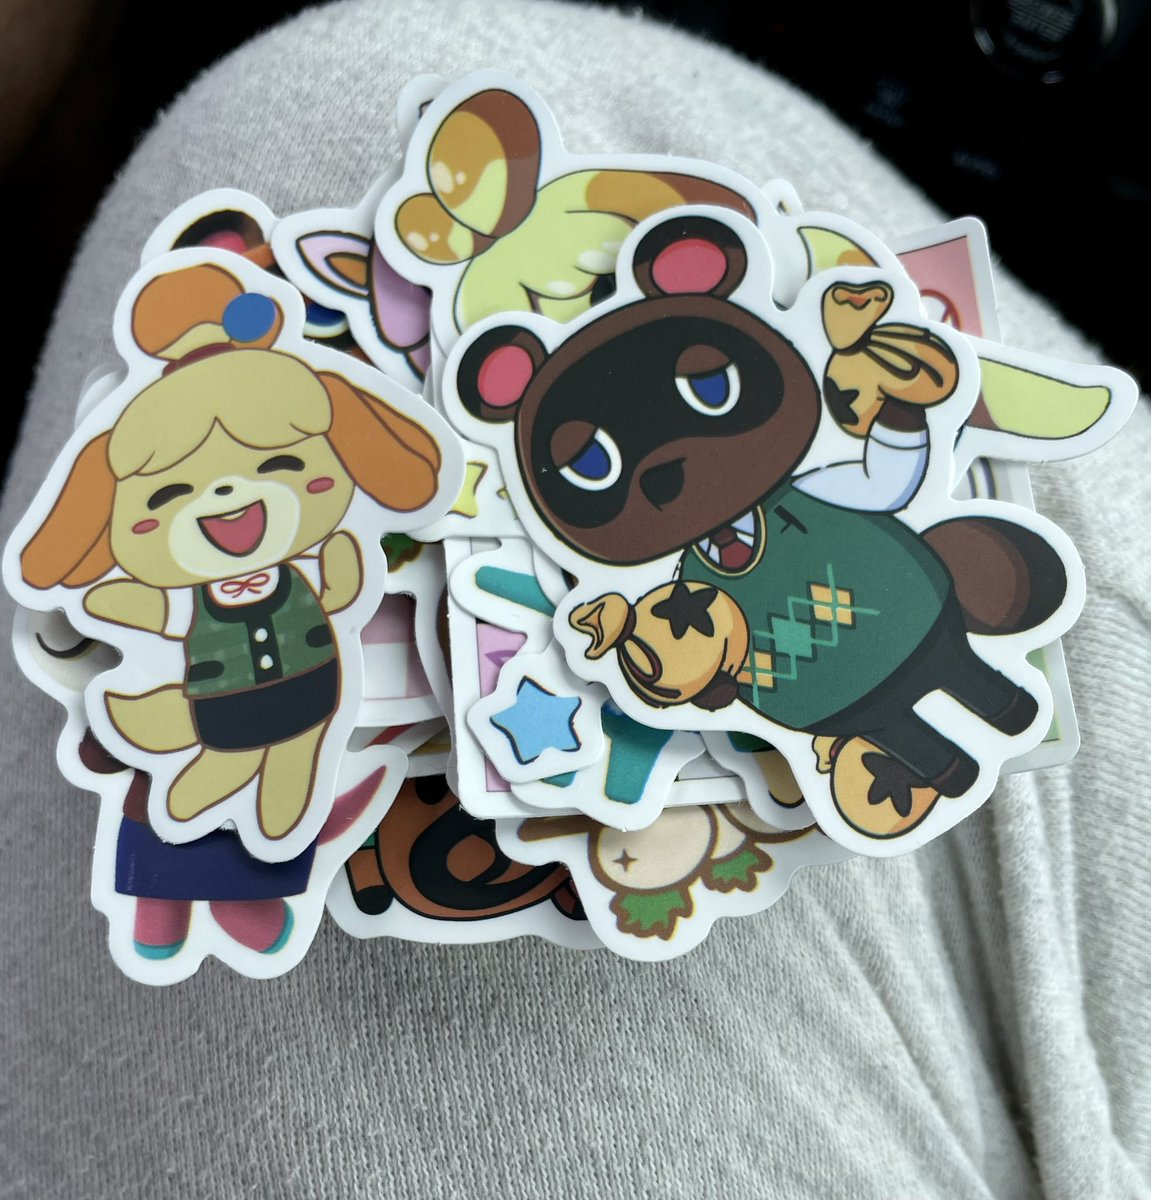 When you have a little friend at work who happens to also love Animal Crossing… you get special incentives 😂 #YesIEnjoyVideoGames #WhateverItTakes #8YearOldHobbies 🤷🏻‍♀️ 🎮 🦓 🦔 🐻 ❤️ 🏝 #StickersForTheWin